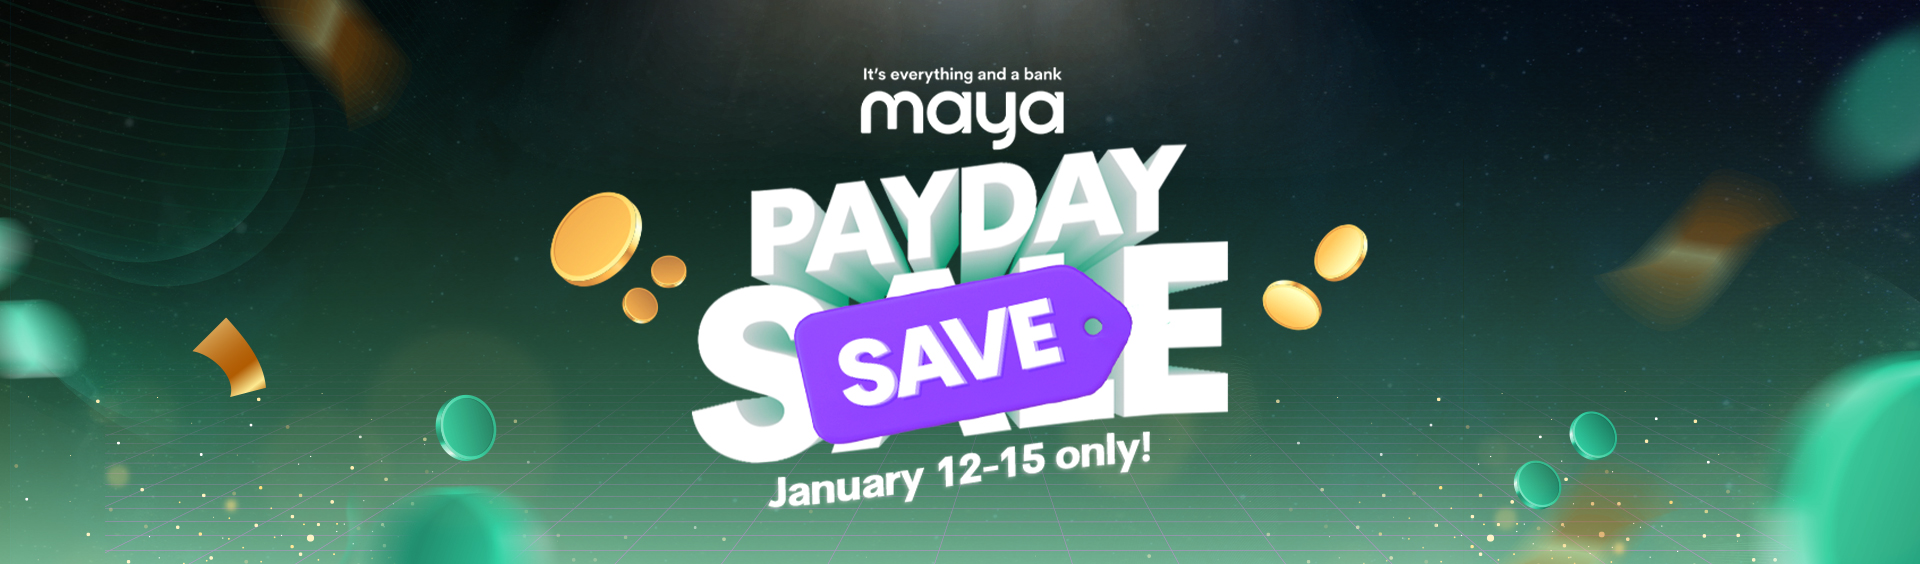 payday-save-0123